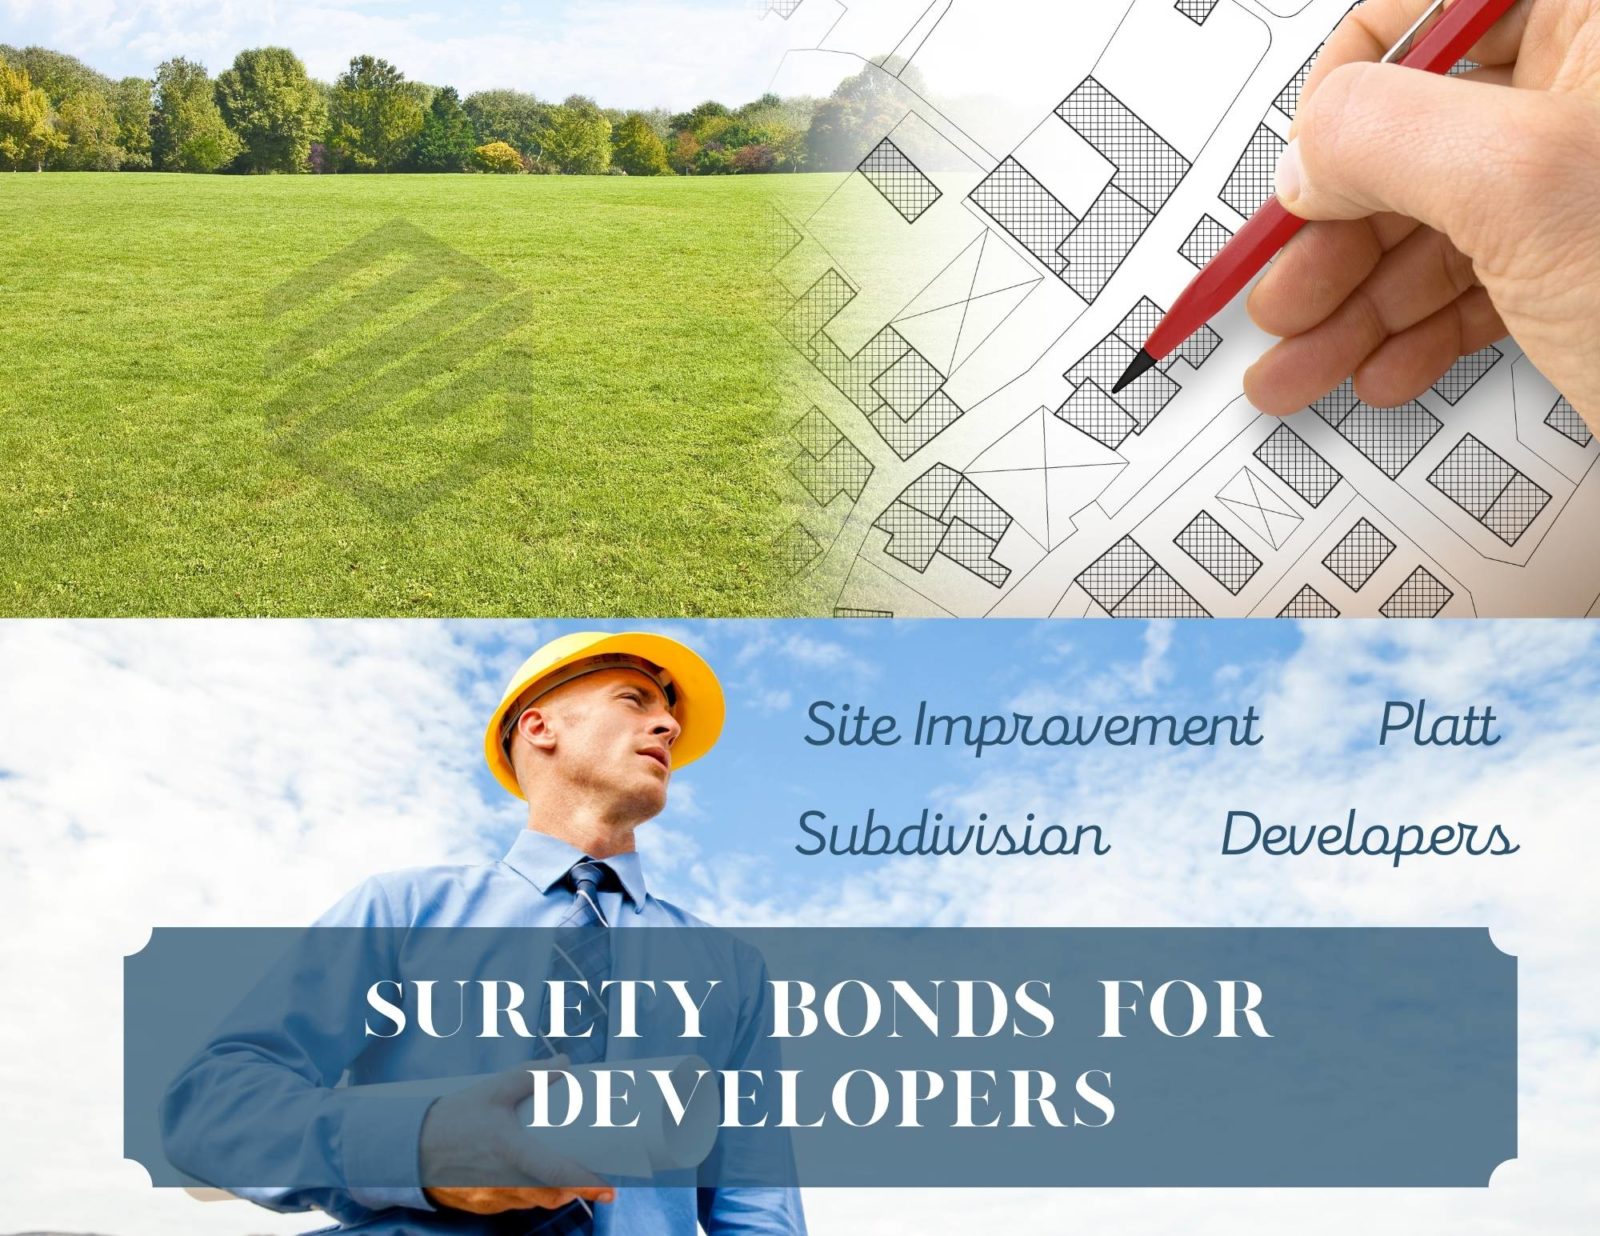 Developer Surety Bonds - At the top an empty field ready for development beside blueprints. At the bottom, a developer looking on with the words "Surety Bonds for Developers"